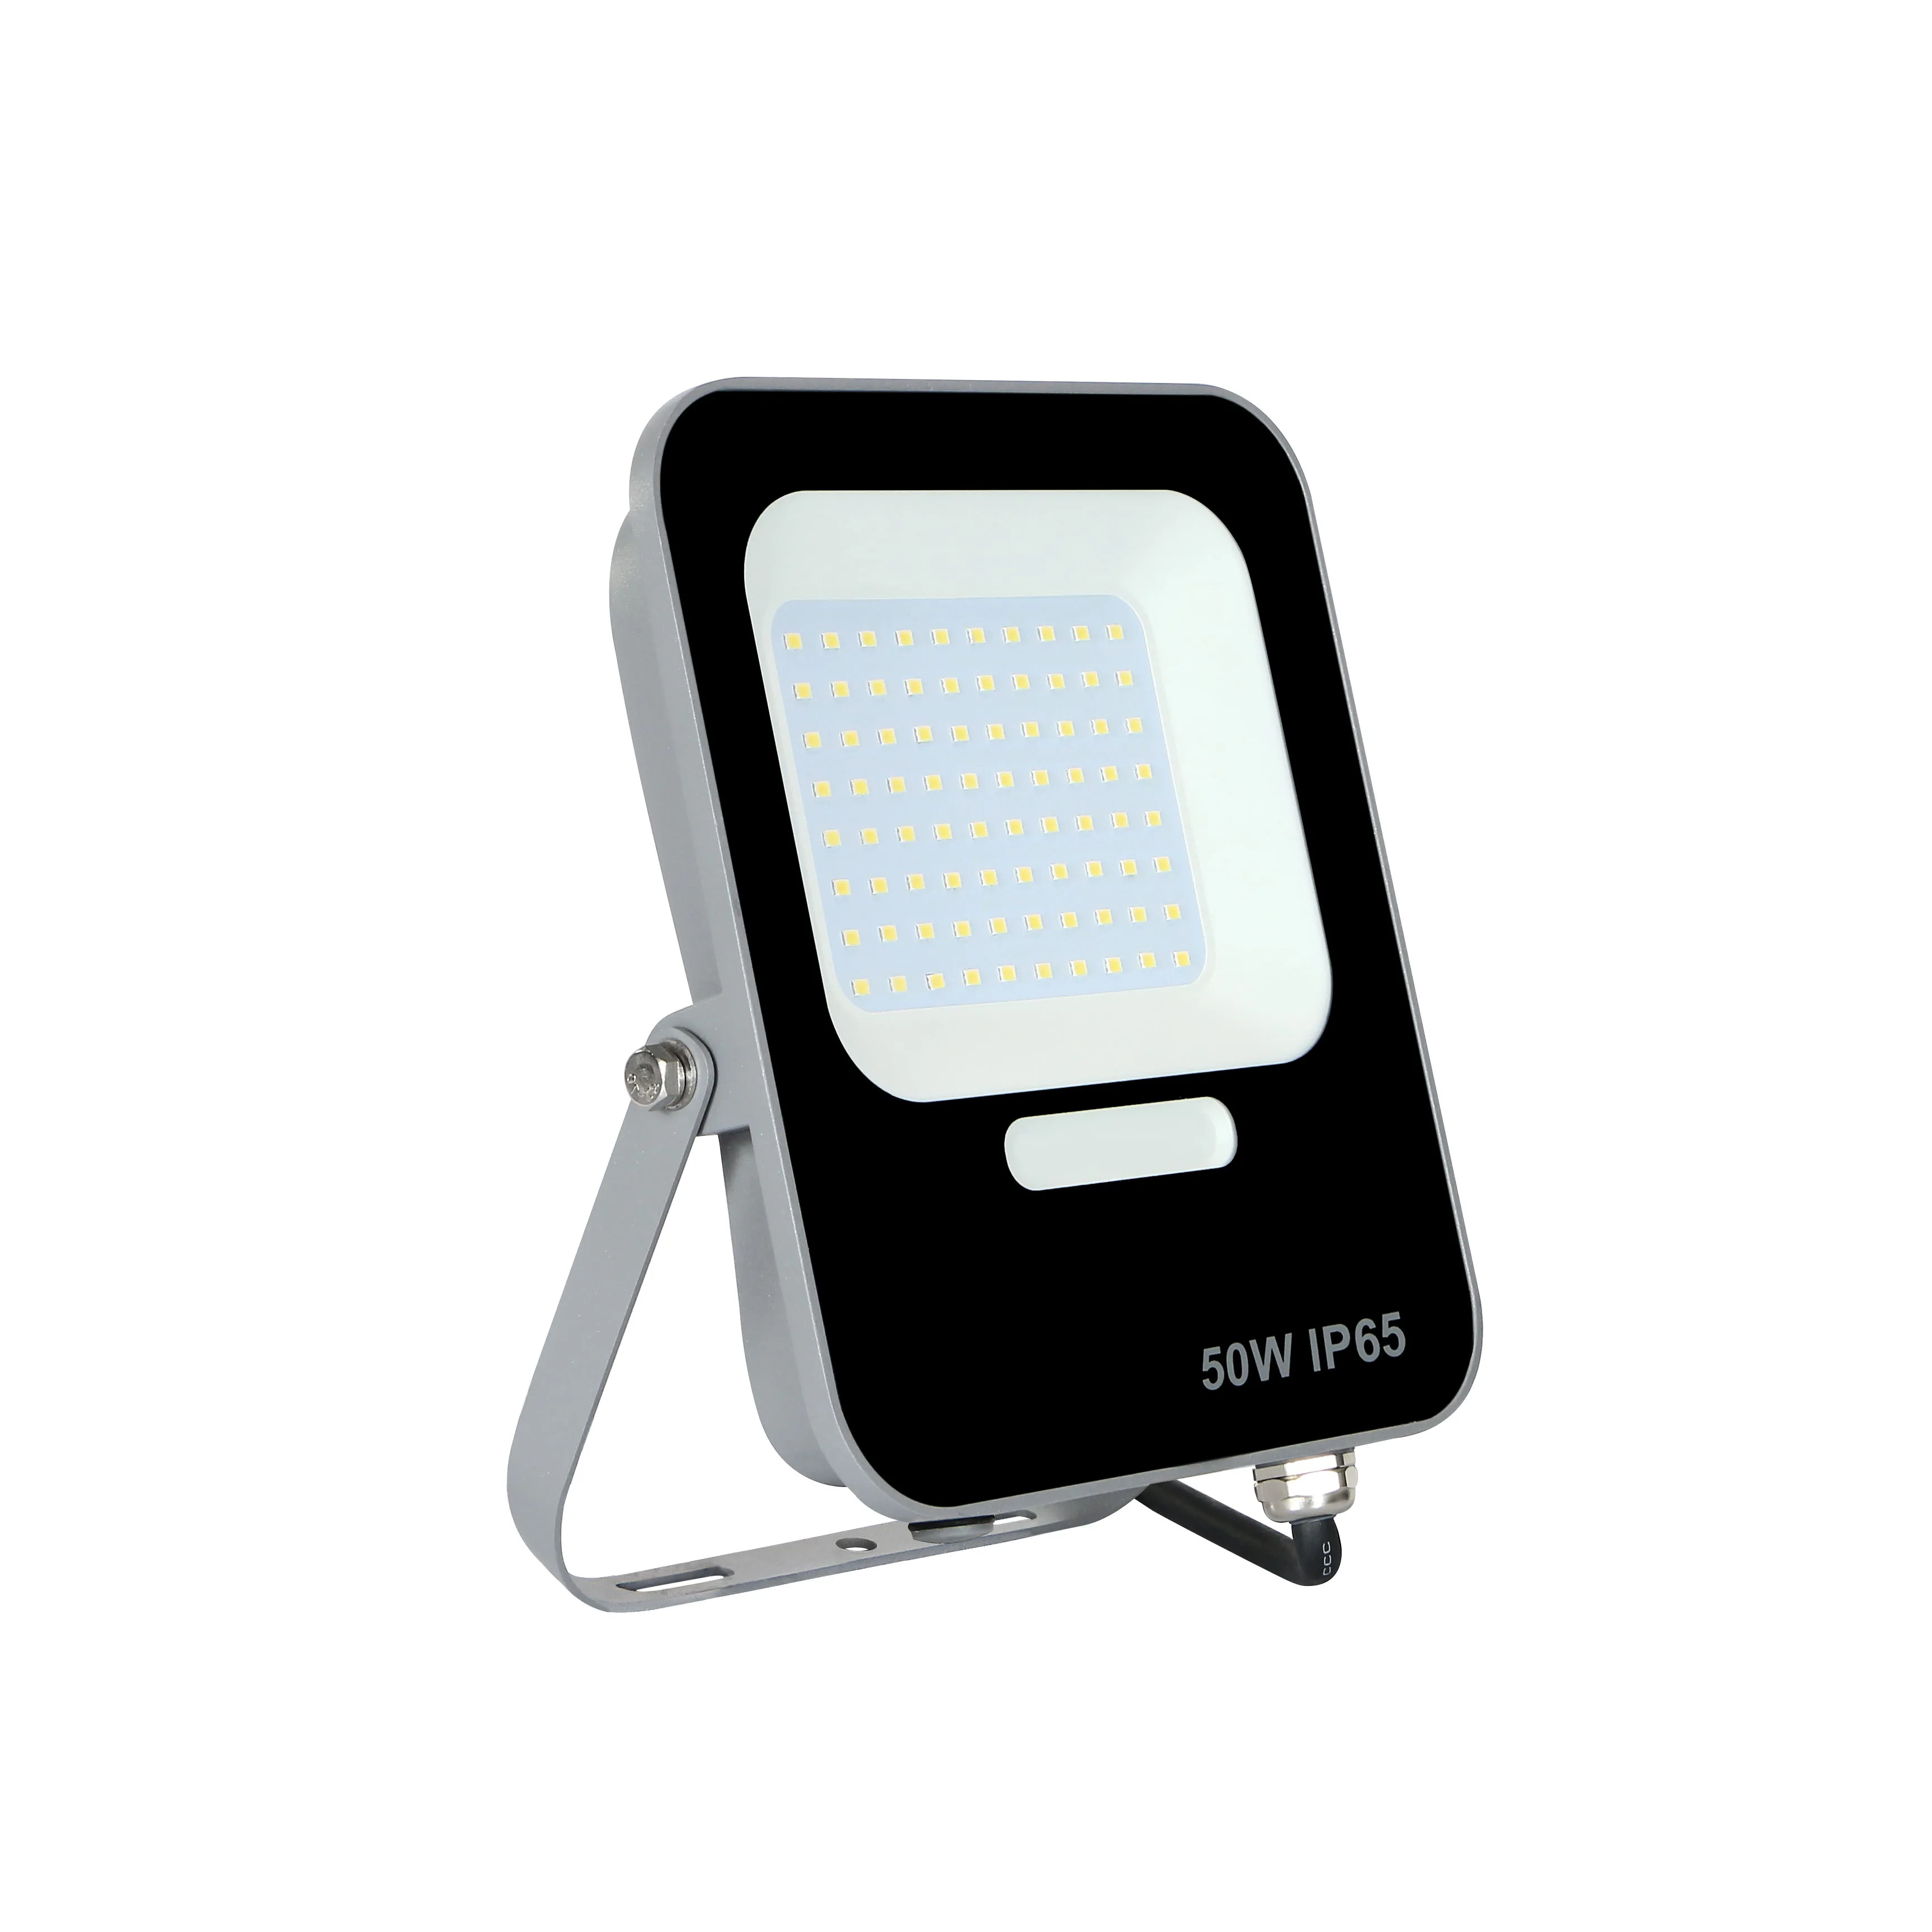 50W Outdoor LED Flood Light, Super Bright Outdoor Work Light, IP65 Waterproof, 5000LM, Super Bright Security Lights